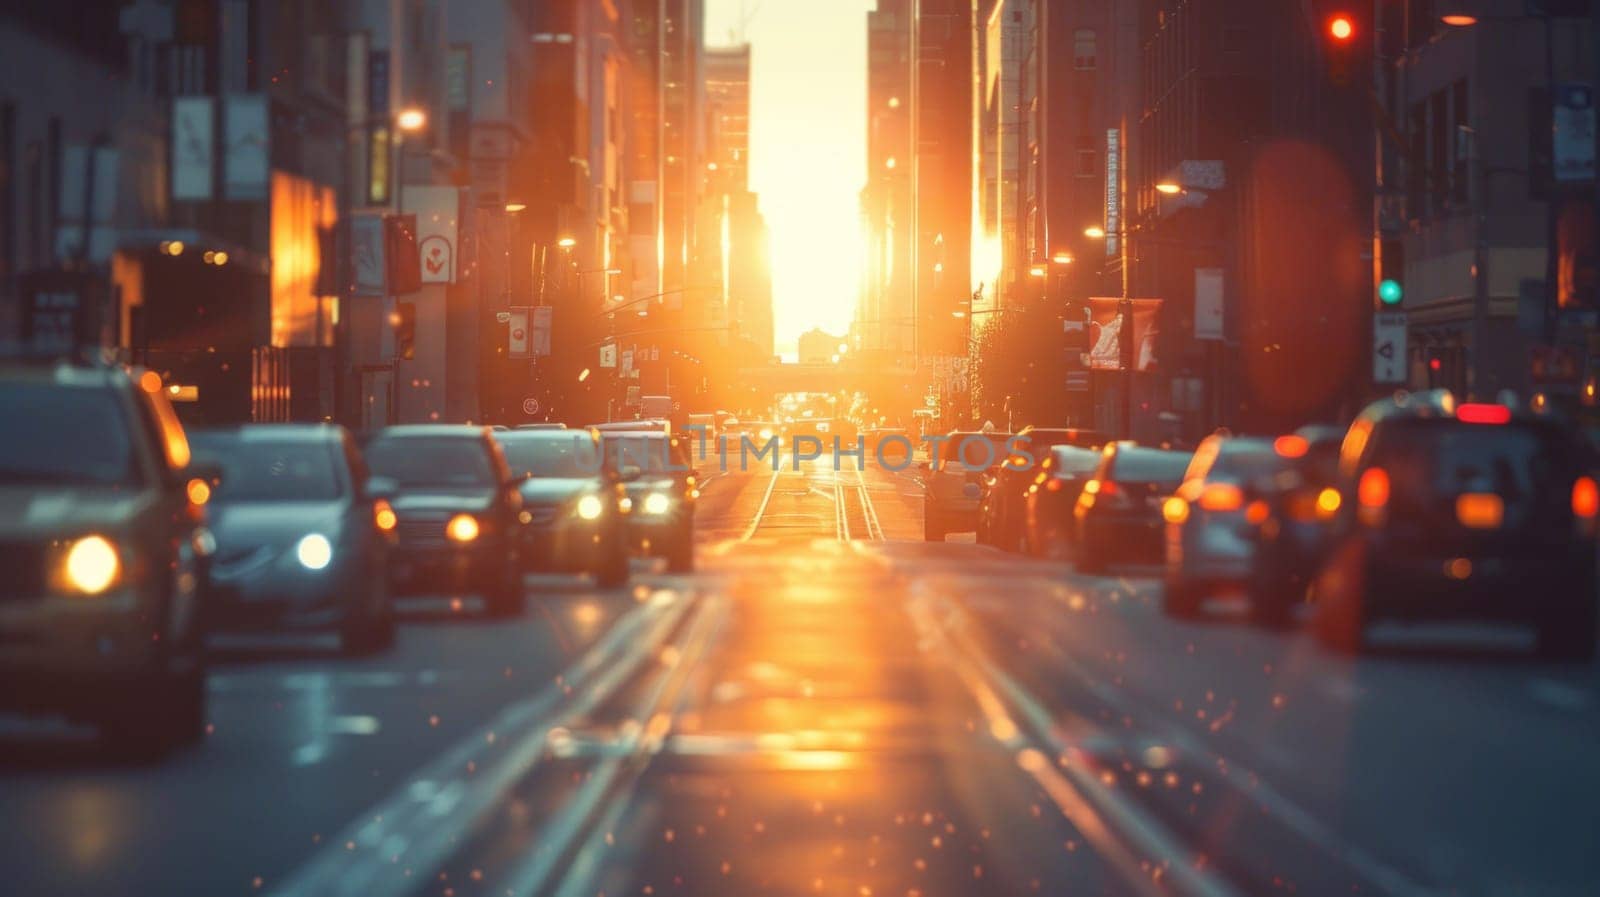 A busy city street with cars and a bright orange sun in the background.